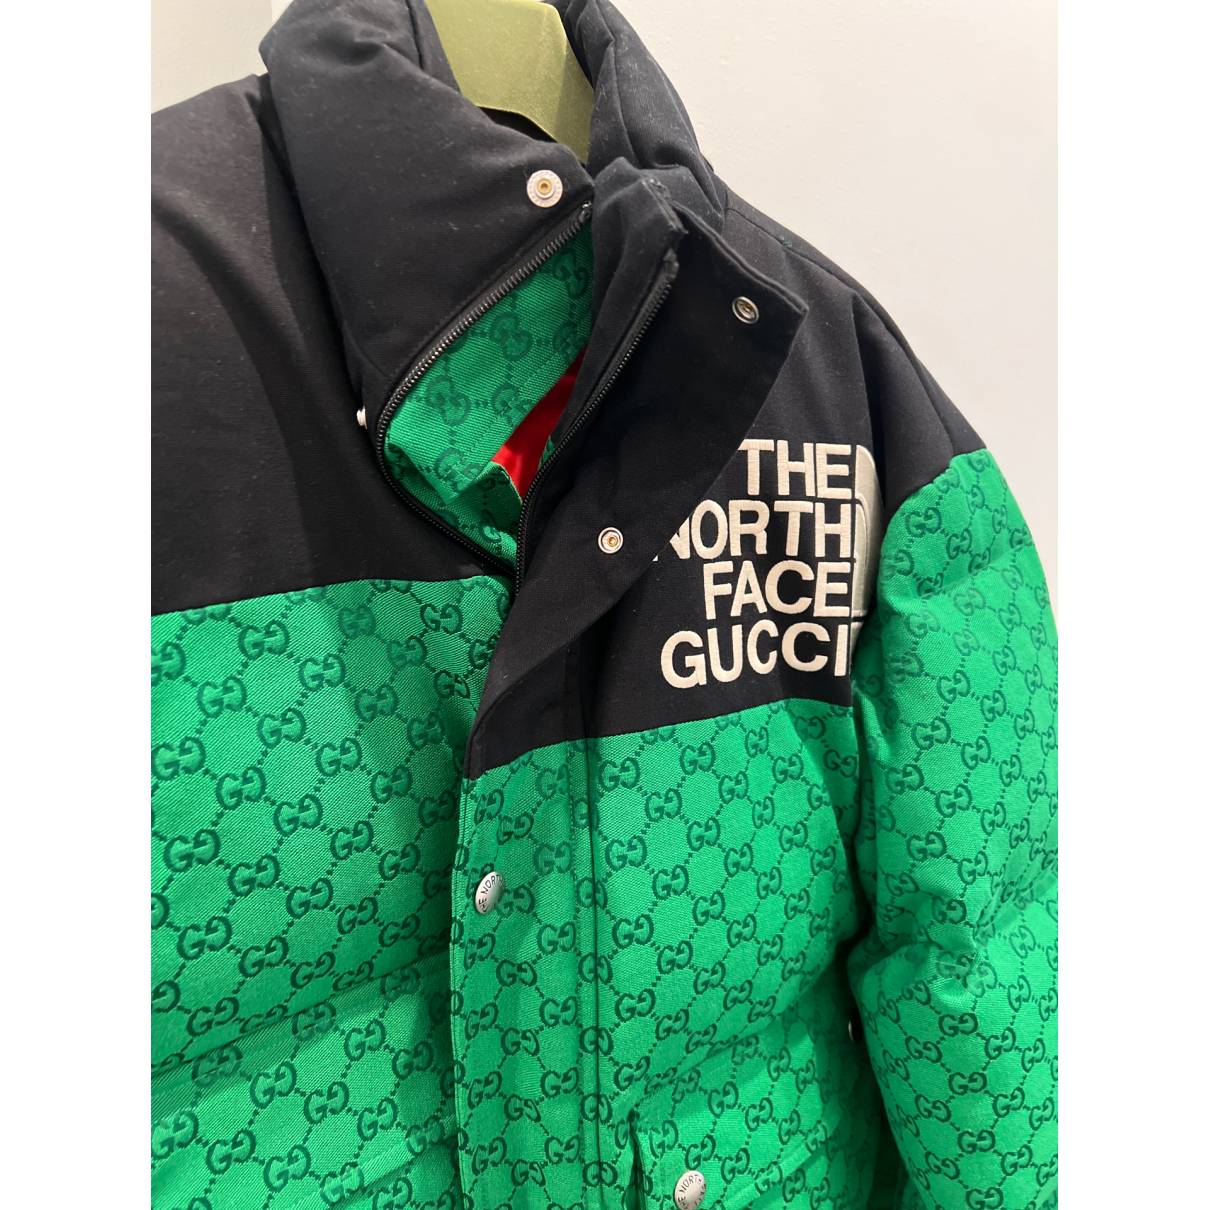 The North Face x Gucci - Authenticated Coat - Linen Green for Women, Never Worn, with Tag